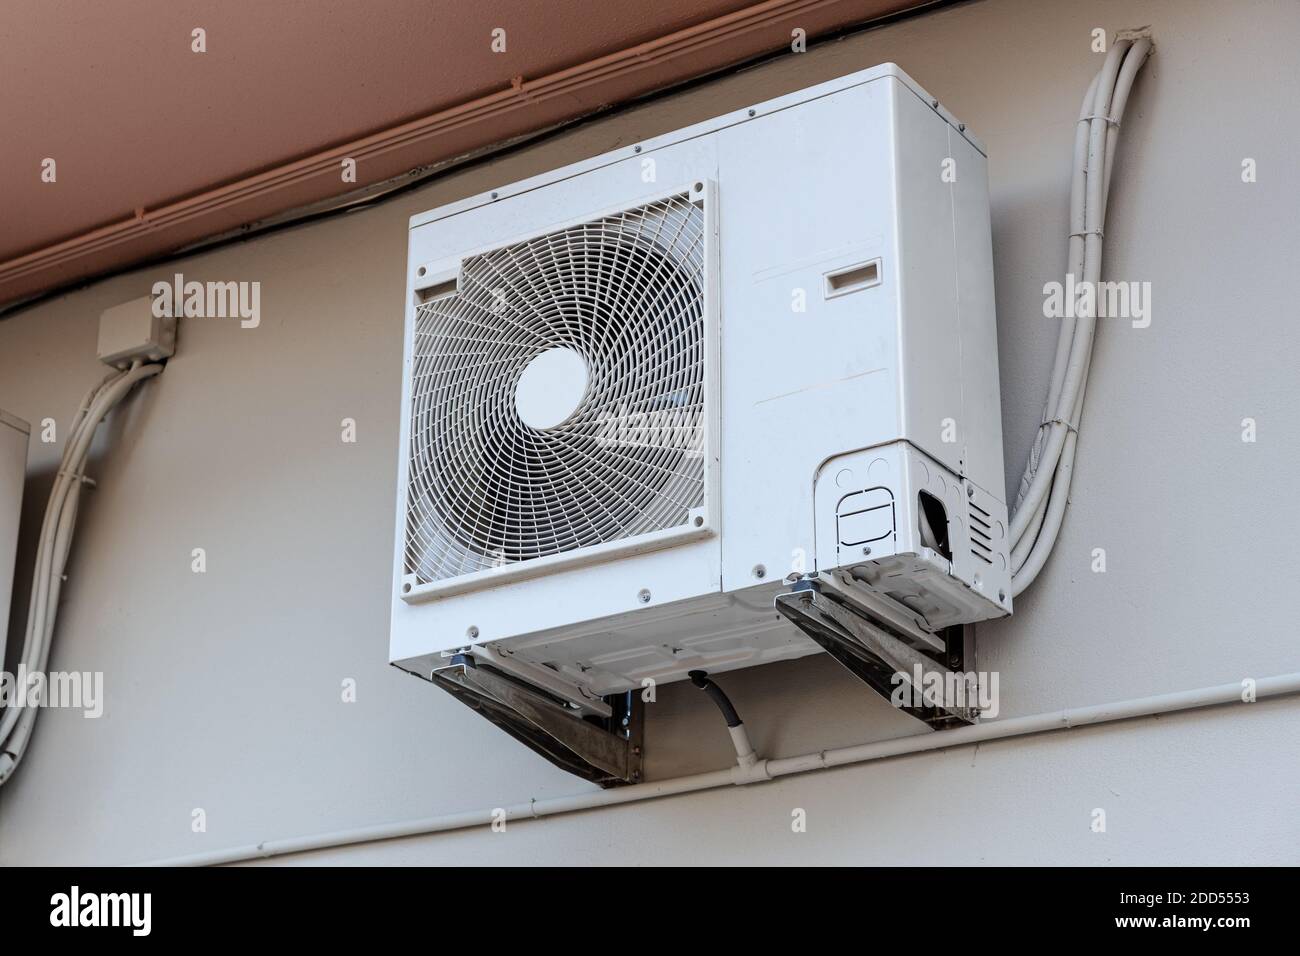 Outdoor Air conditioning unit mounted on wall used for cooling space Stock Photo